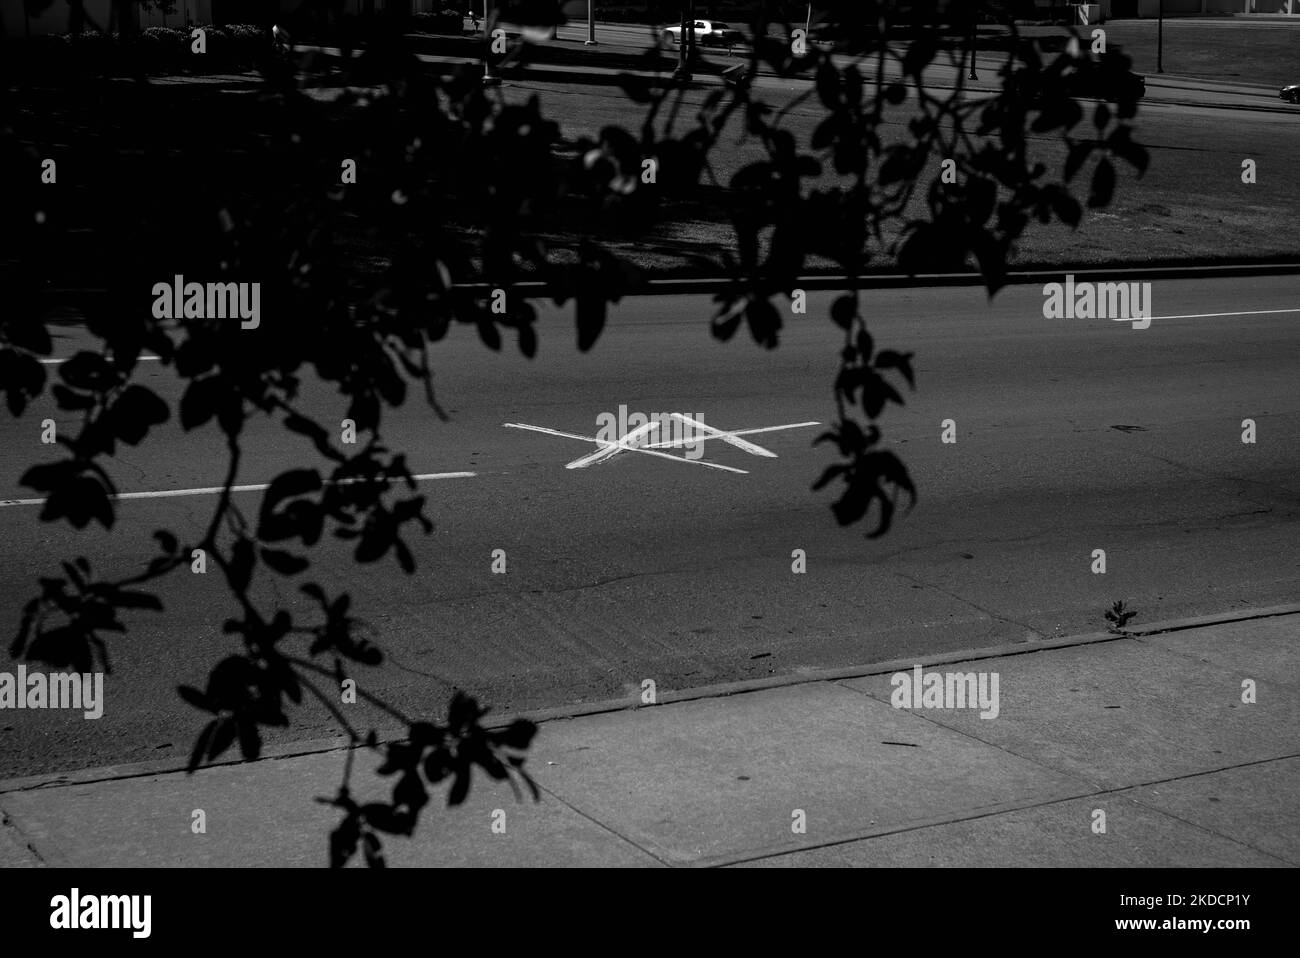 'X' marks the location on the street in Dealey Plaza, Dallas Texas, where the first shot from Lee Harvey Oswald hit John F. Kennedy, the 35th President of the United States on 22 November 1963. The second 'X' is where the same bullet hit Texas Governor John Connolly. (Photo by George Wilson/NurPhoto) Stock Photo